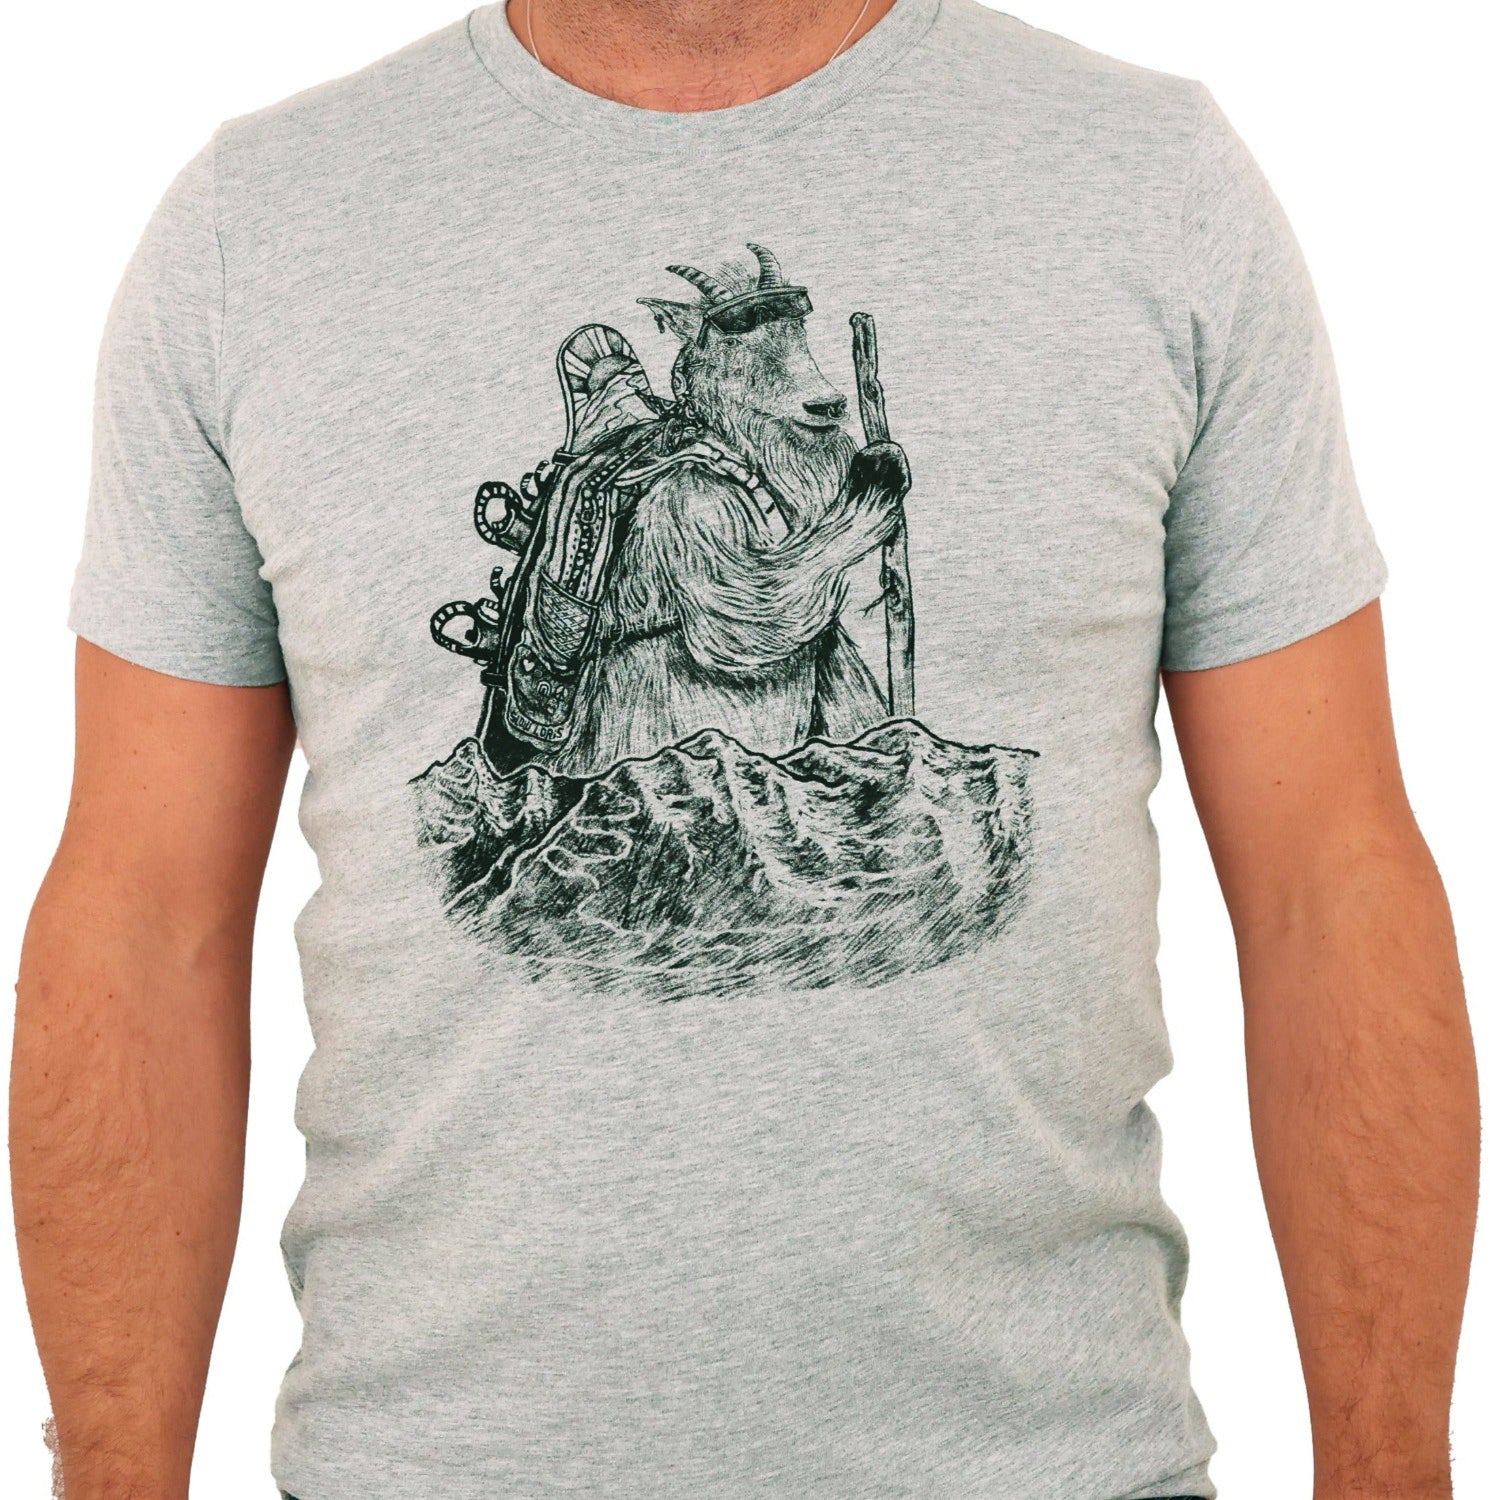 heather grey t-shirt with black ink of a mountain goat hiking with a walking stick, sunglasses, and a snowboard on his backpack. Mountains with fresh tracks anterior